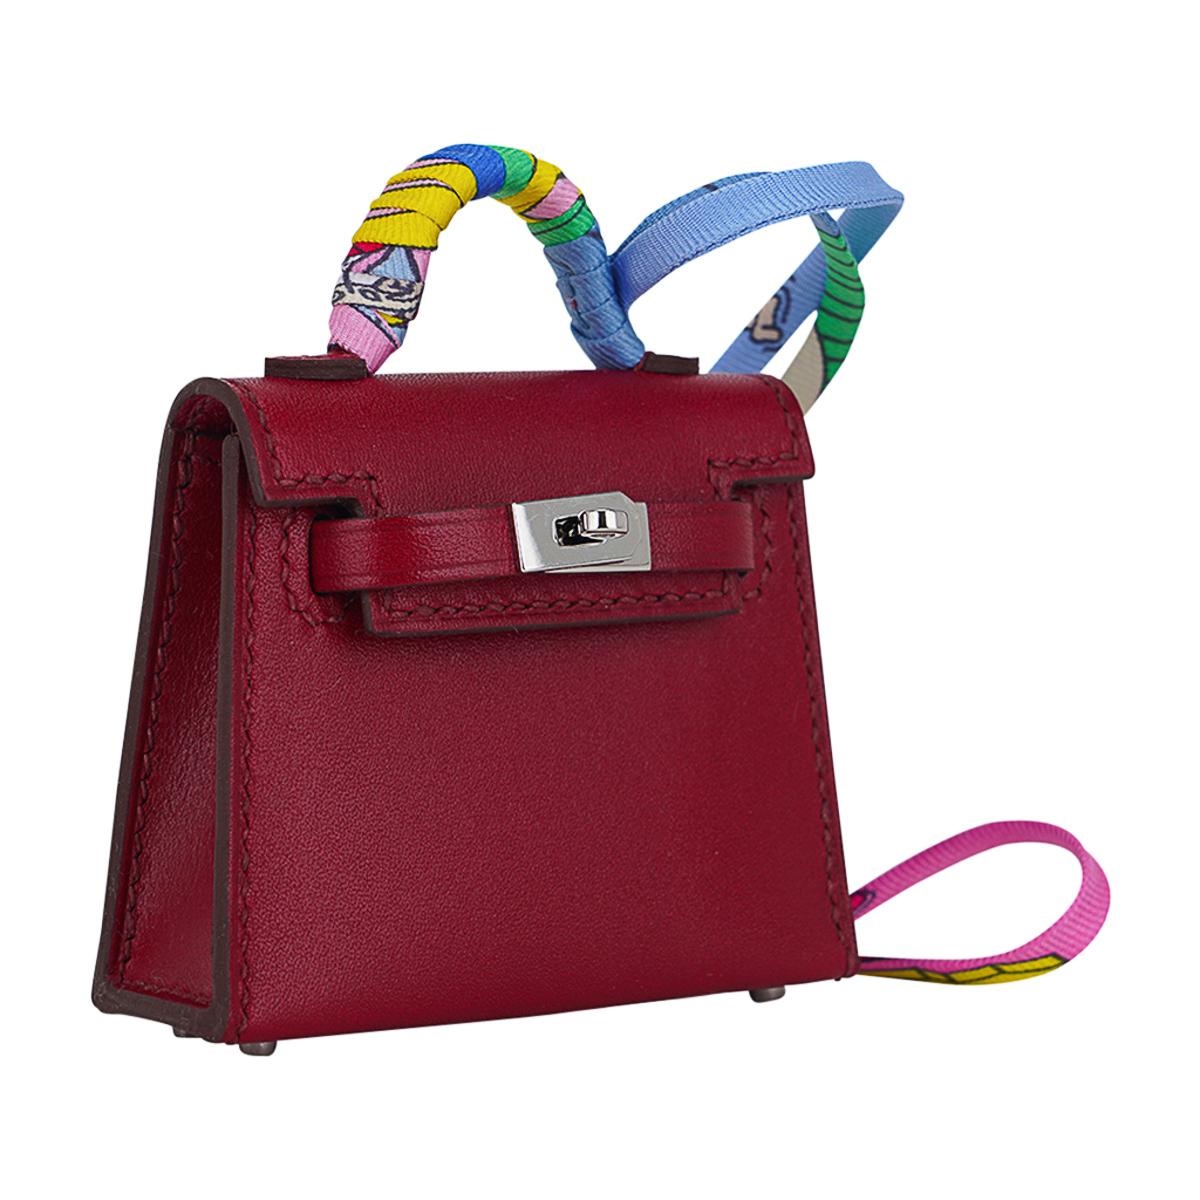 Mightychic offers a limited edition Hermes Kelly Twilly Bag Charm featured in gorgeous Rubis.
Shaped like a Kelly Bag crafted in Tadelakt leather with amazing detail with working hardware.
The charm has Palladium hardware and a wrapped handle in a